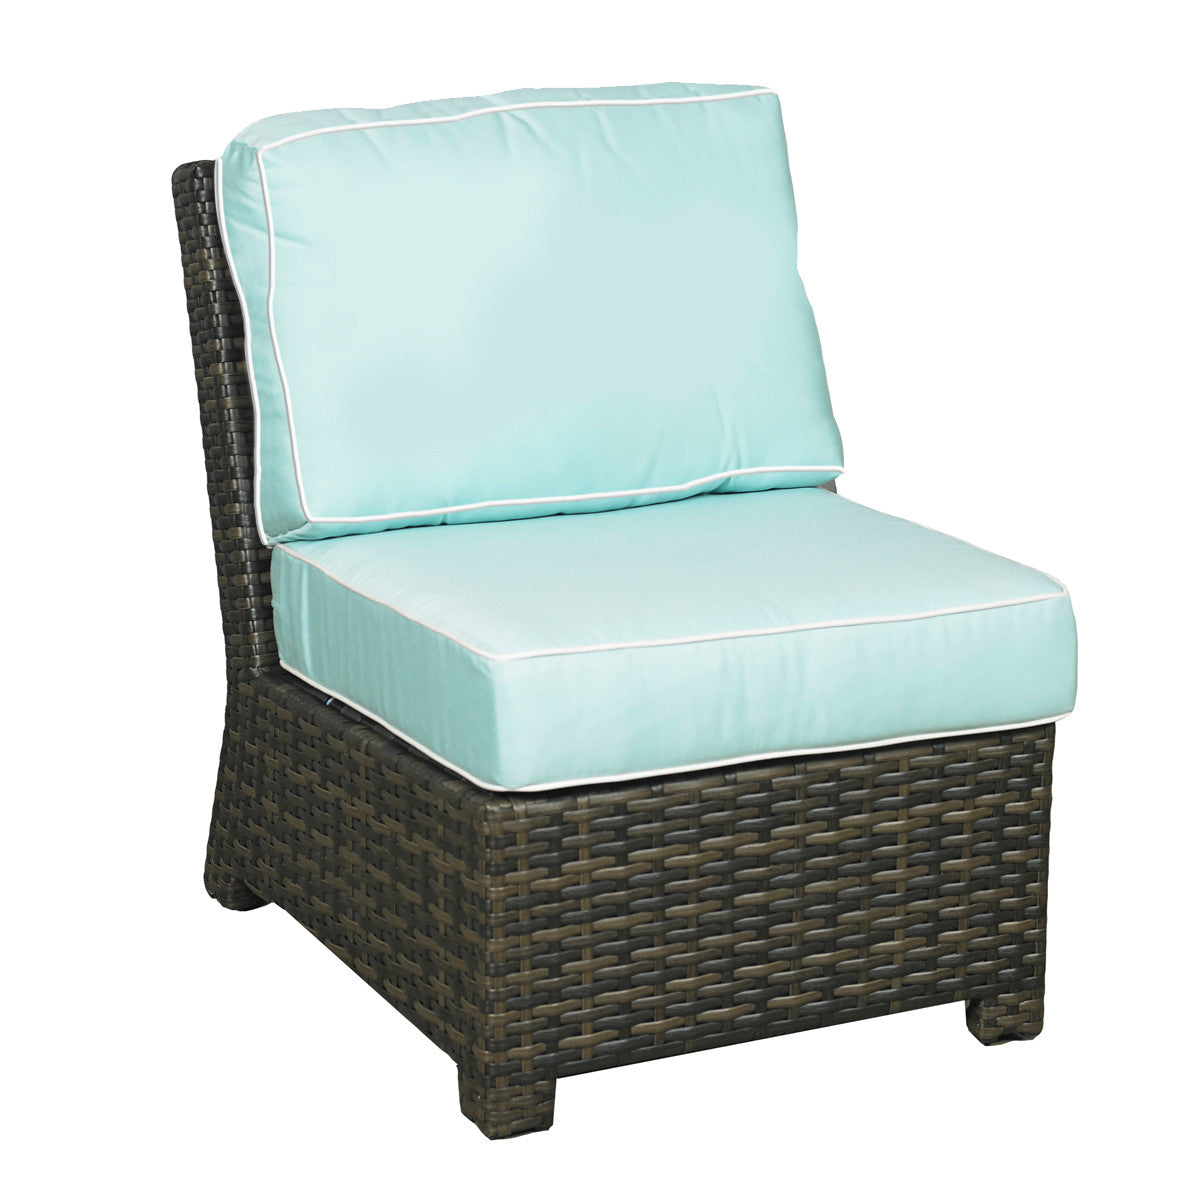 Forever Patio Brookside Wicker Sectional MIddle Chair